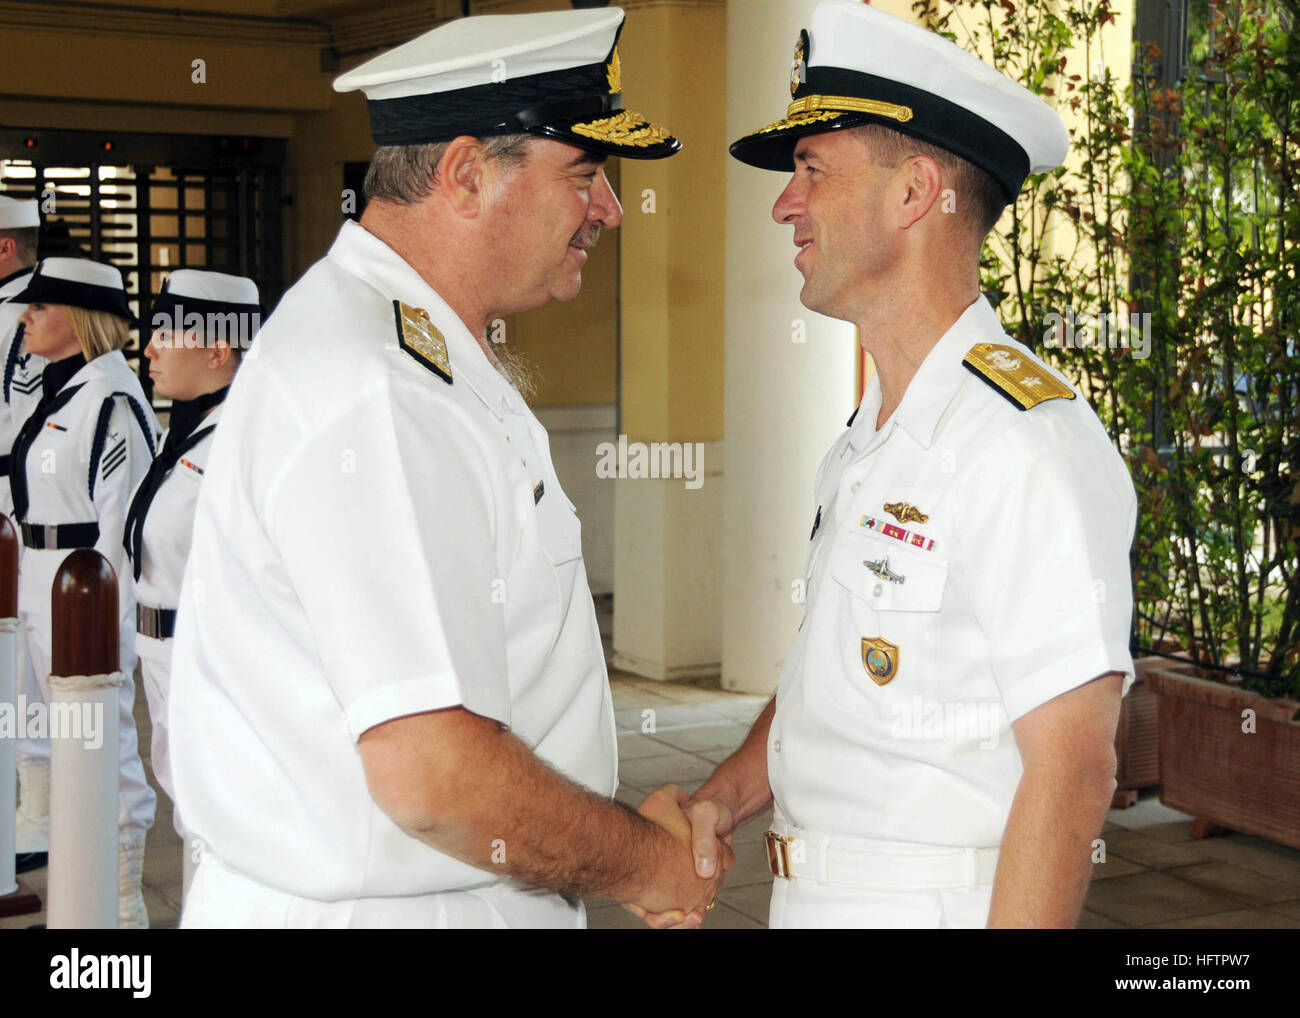 090909-N-6138K-001:  NAPLES, Italy (August 13, 2009) – Vice Adm. George Karamalikis, chief of the Hellenic Navy general staff, is greeted by Rear Adm. John Richardson, deputy commander of U.S. 6th Fleet, upon arrival here.  Karamalikis is in Naples as part of a visit with locally-based U.S. Navy and NATO leadership.  Karamalikis' visit demonstrates the strong and evolving relationship between the U.S. and Hellenic navies.  U.S. Navy photo by Mass Communication Specialist 1st Class (SW) Gary Keen Vice Adm. George Karamalikis & Rear Adm. John Richardson Stock Photo